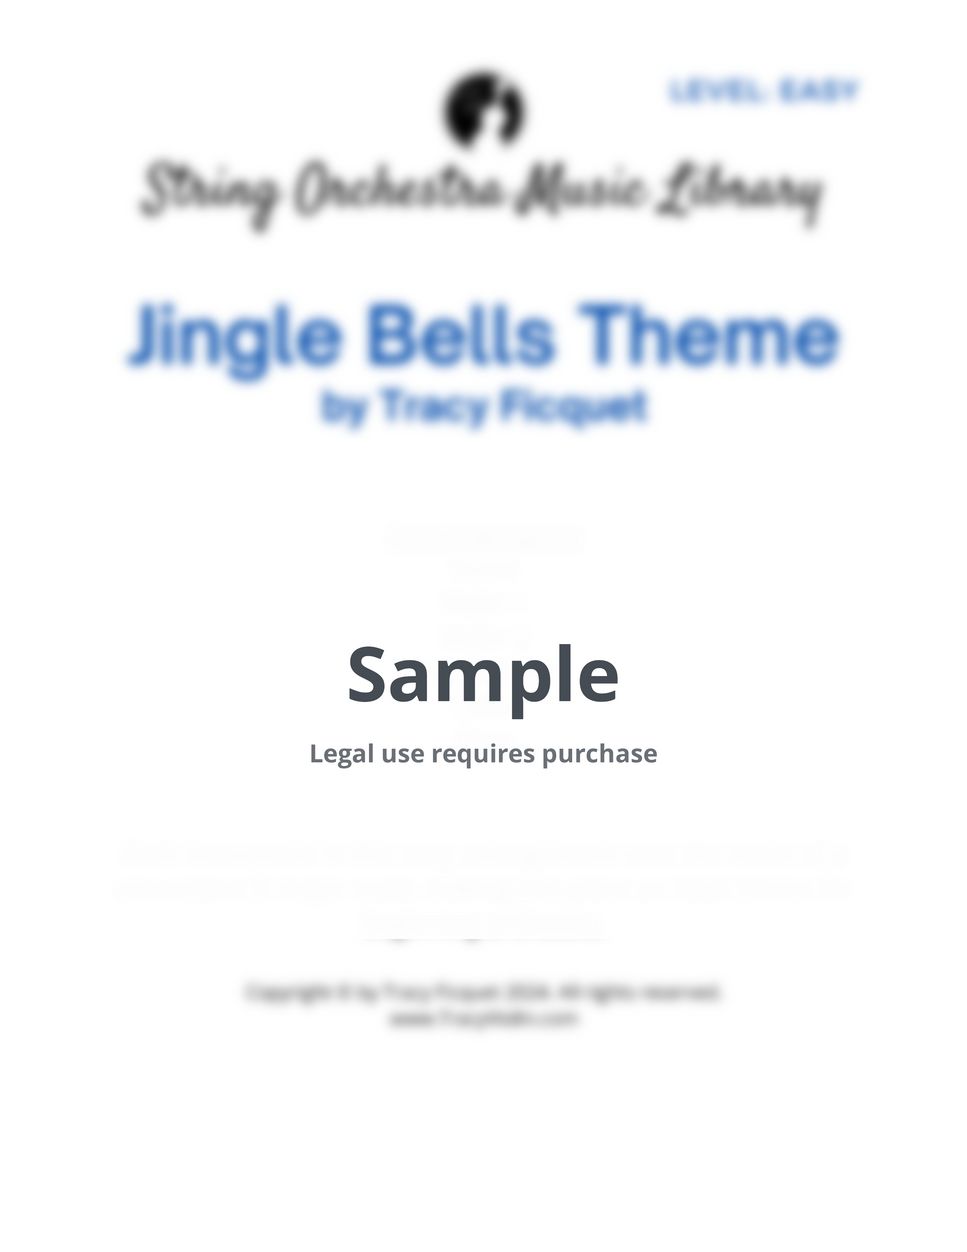 Traditional - Jingle Bells Theme by Tracy Ficquet